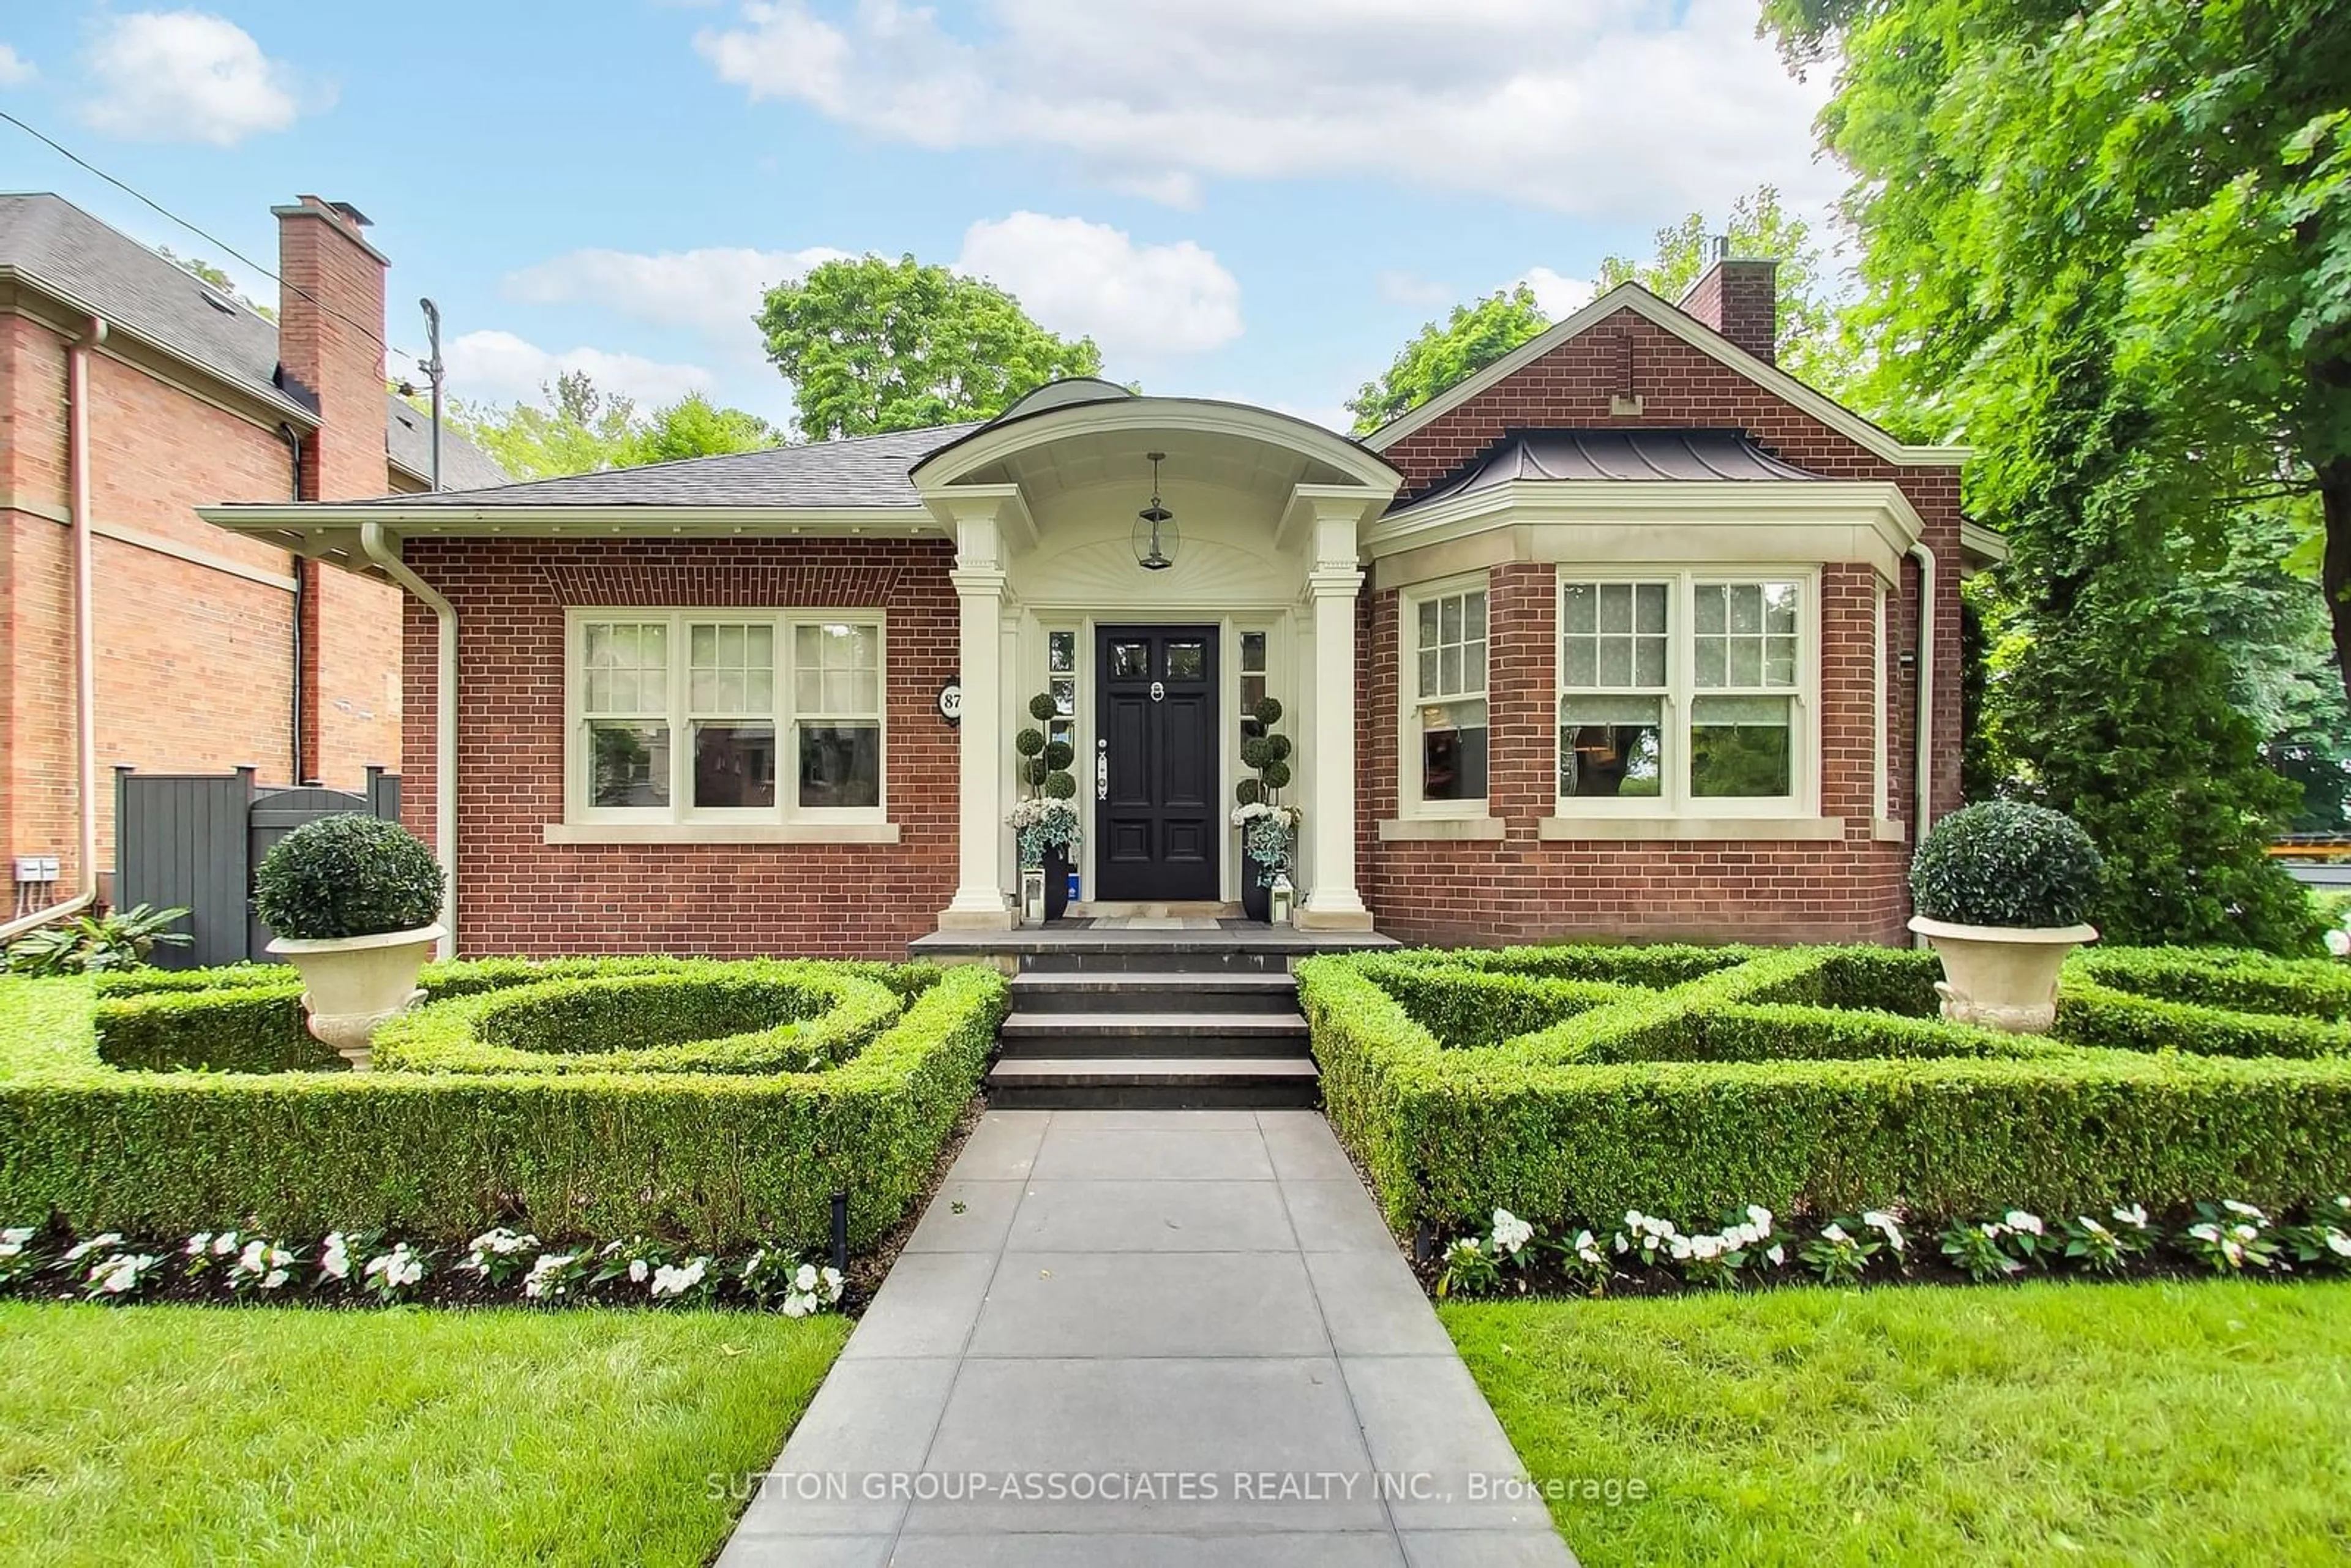 Home with brick exterior material for 87 Hillhurst Blvd, Toronto Ontario M5N 1N5